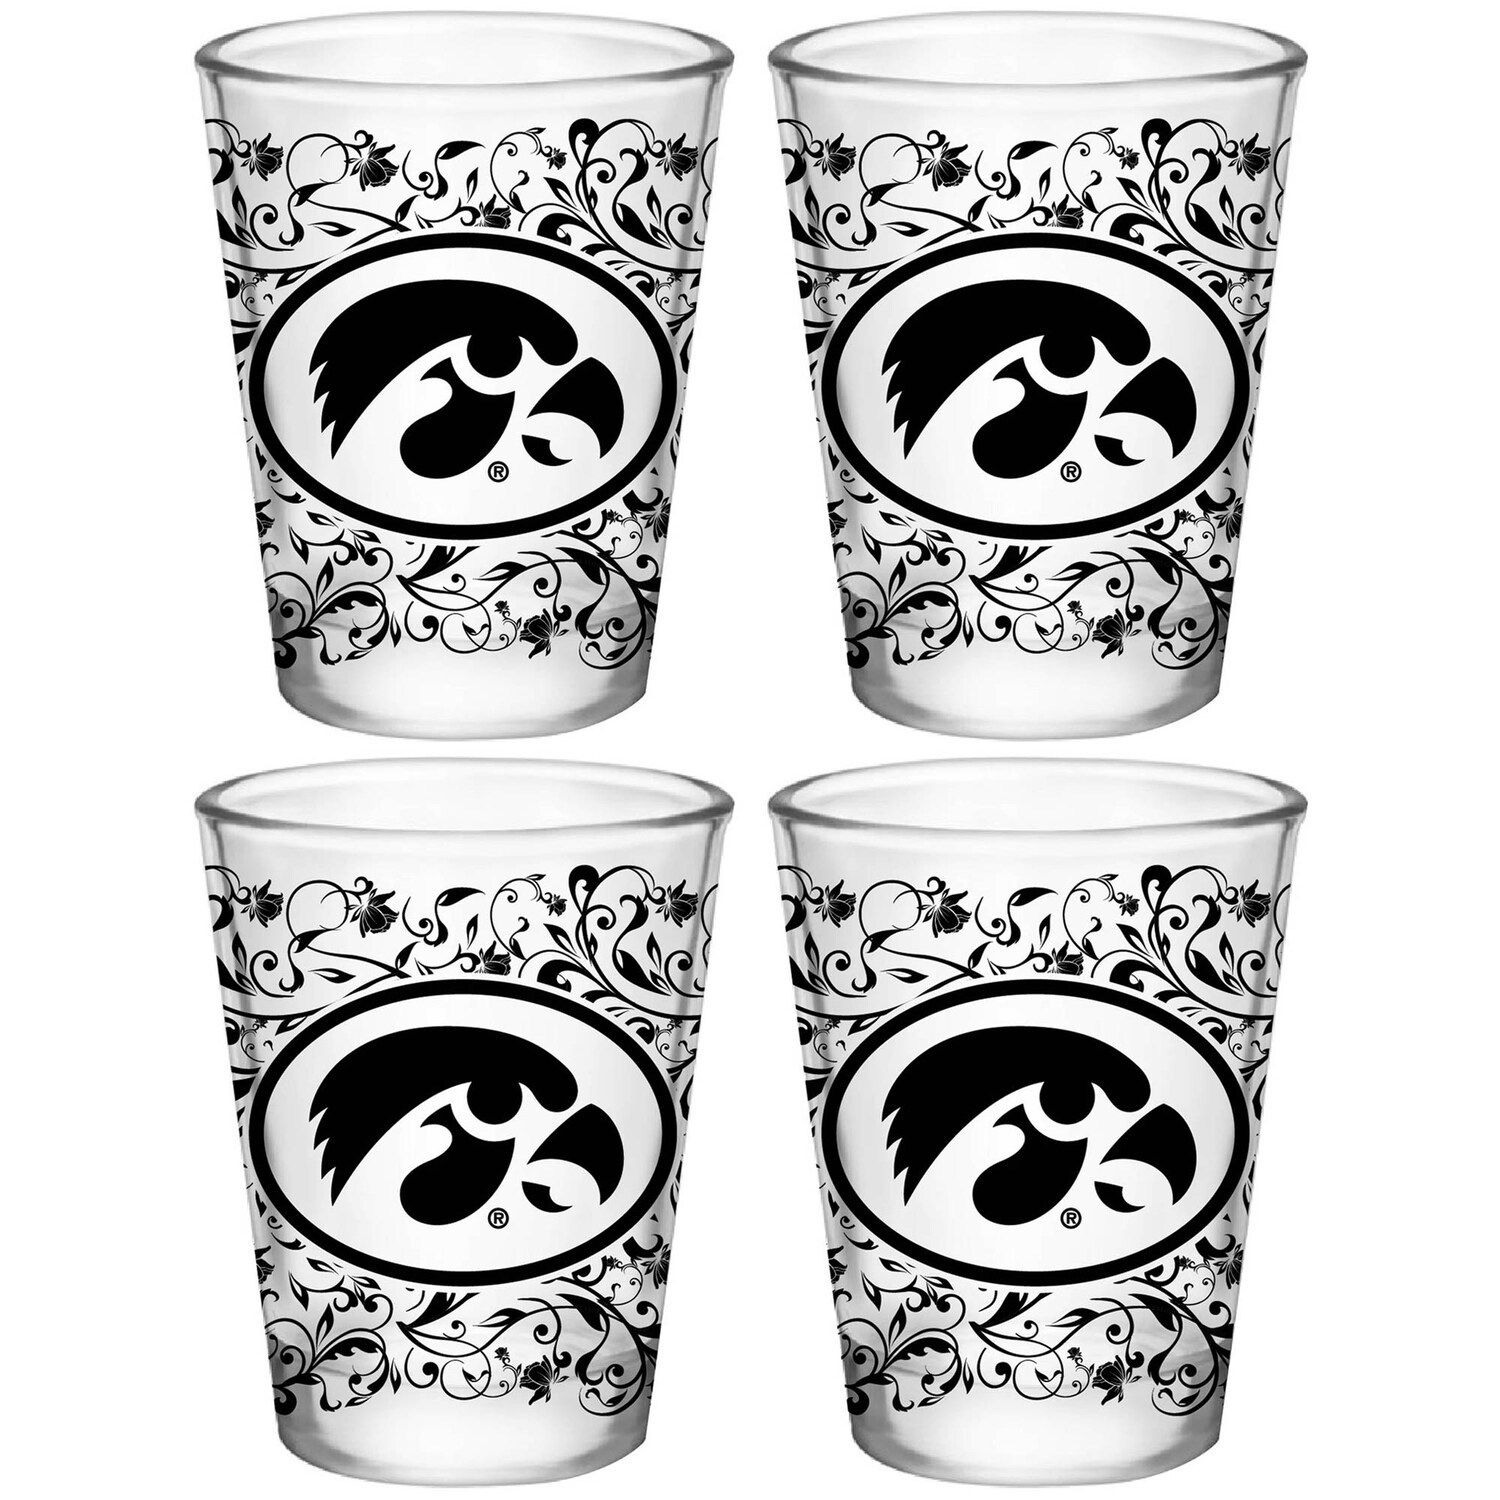 Image for Unbranded Iowa Hawkeyes 4-Pack 1.5oz. Floral Shot Glass Set at Kohl's.